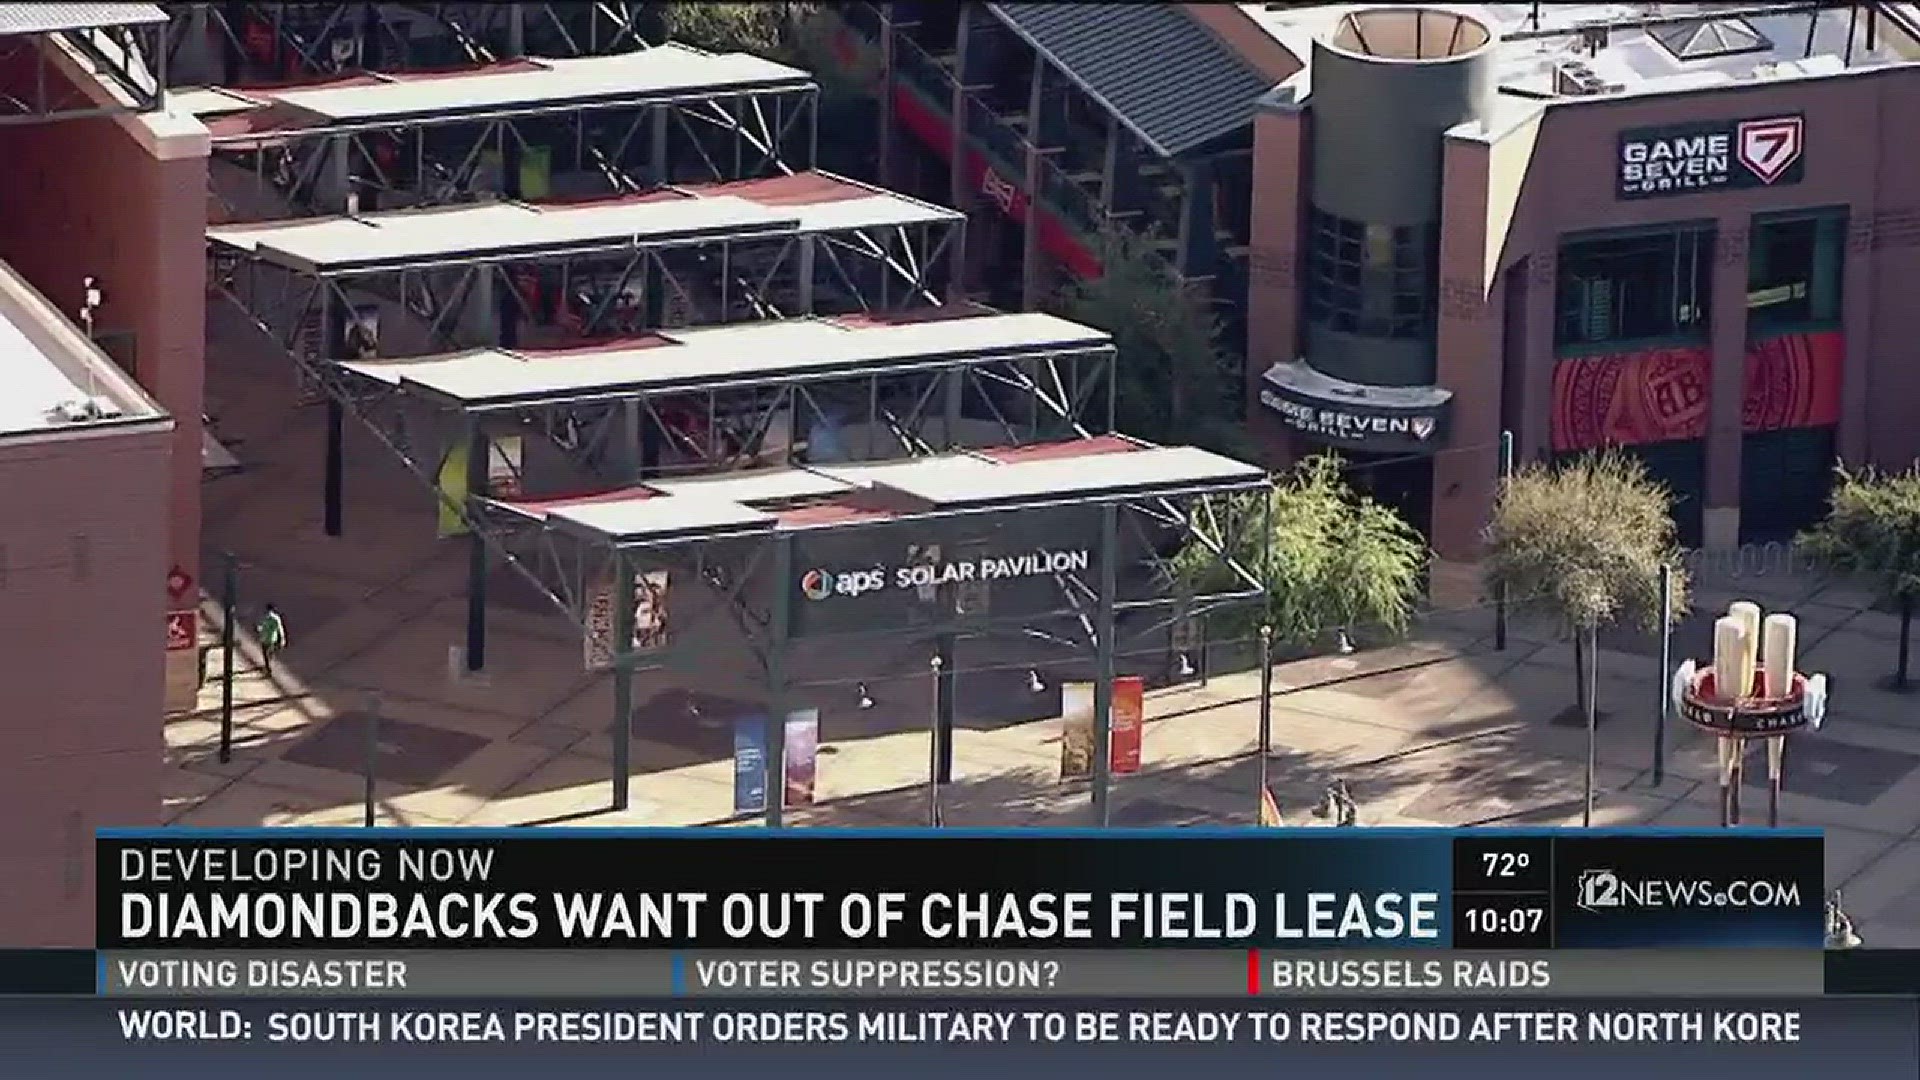 Arizona Diamondbacks continue to search for funding solutions to renovate Chase  Field